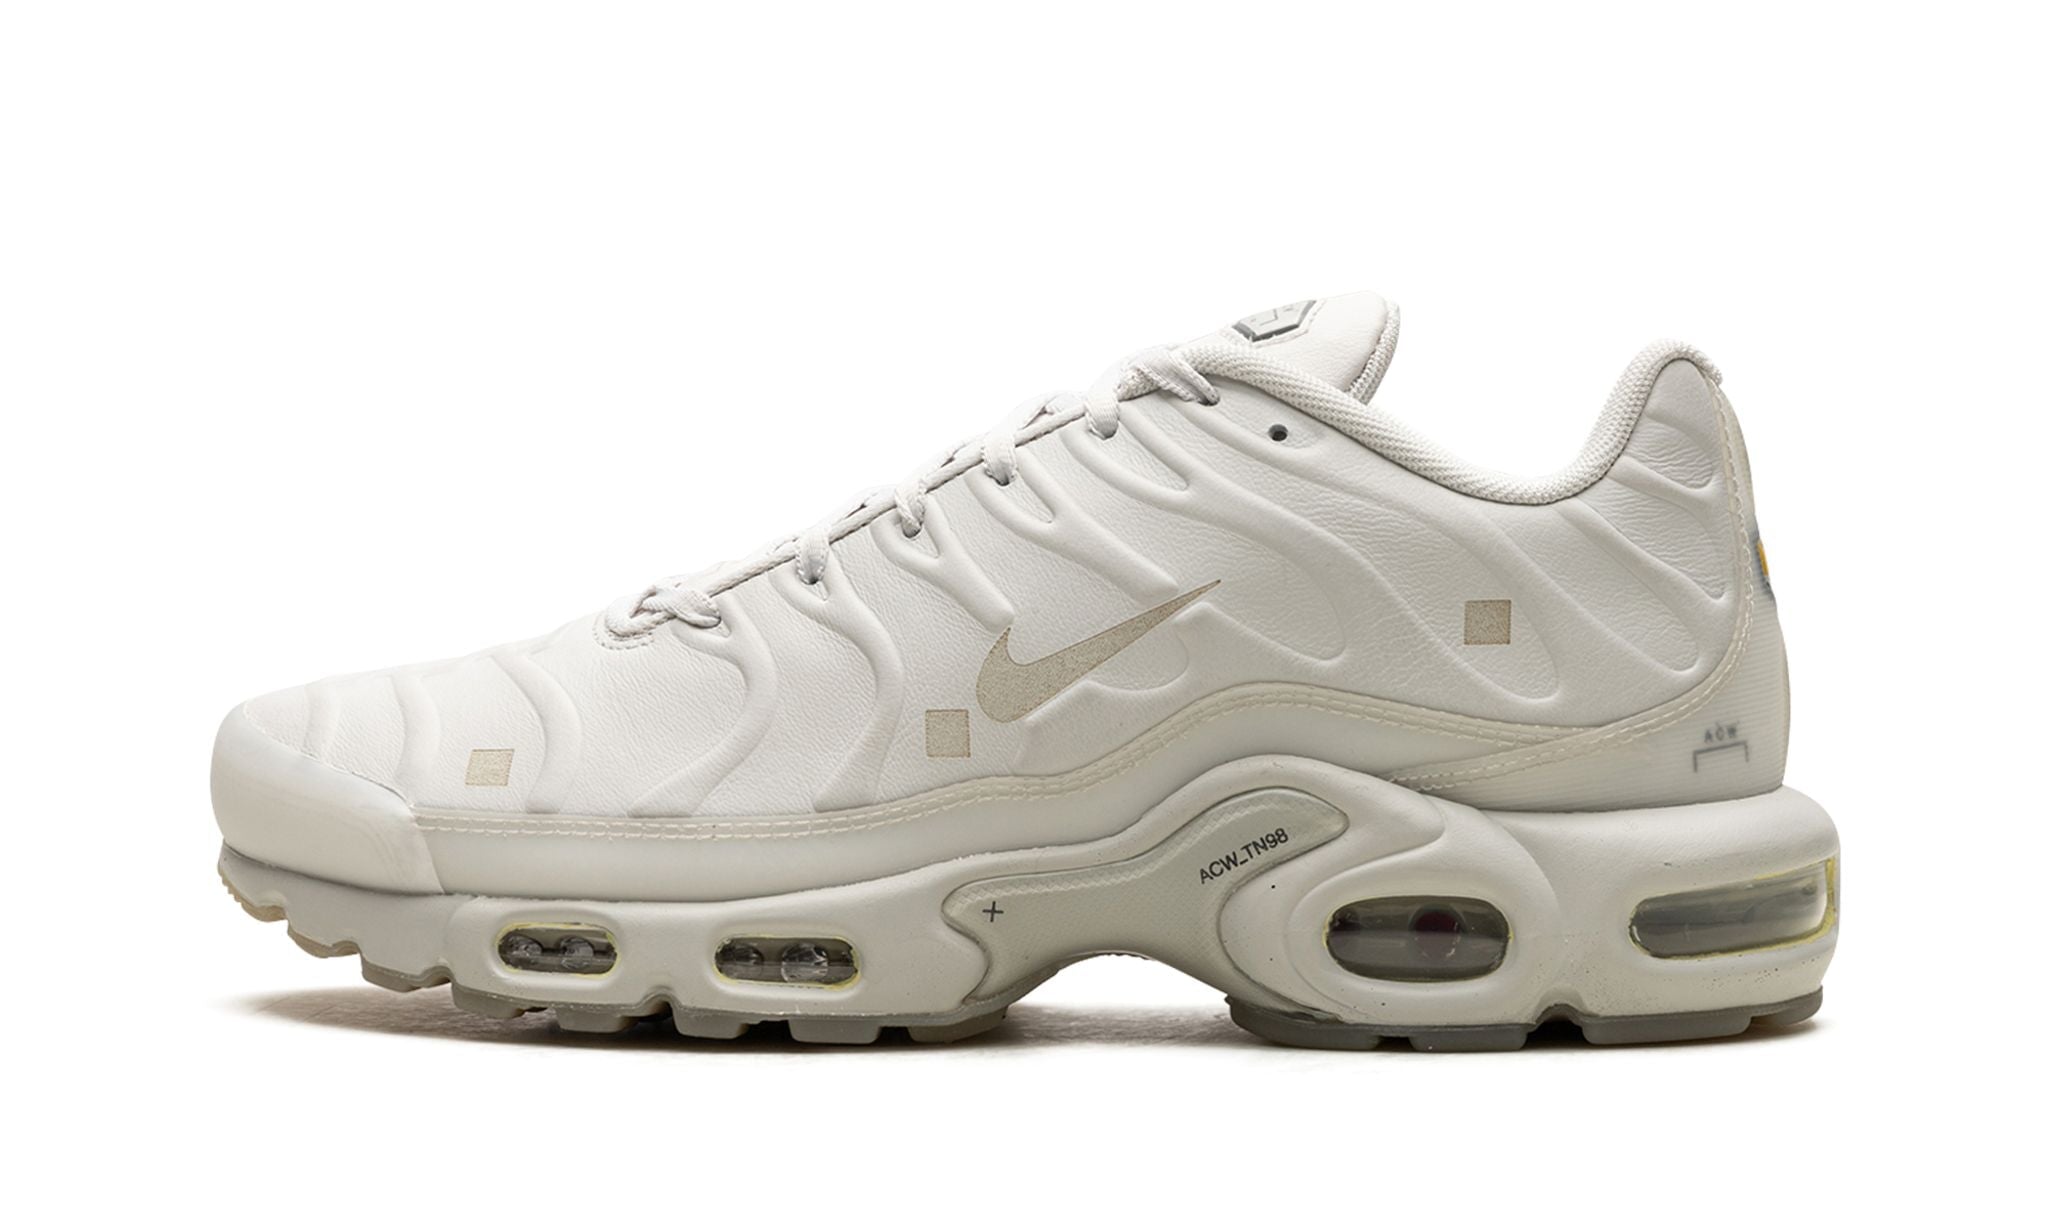 Nike Air Max Plus Tn A-Cold-Wall Platinum Tint product